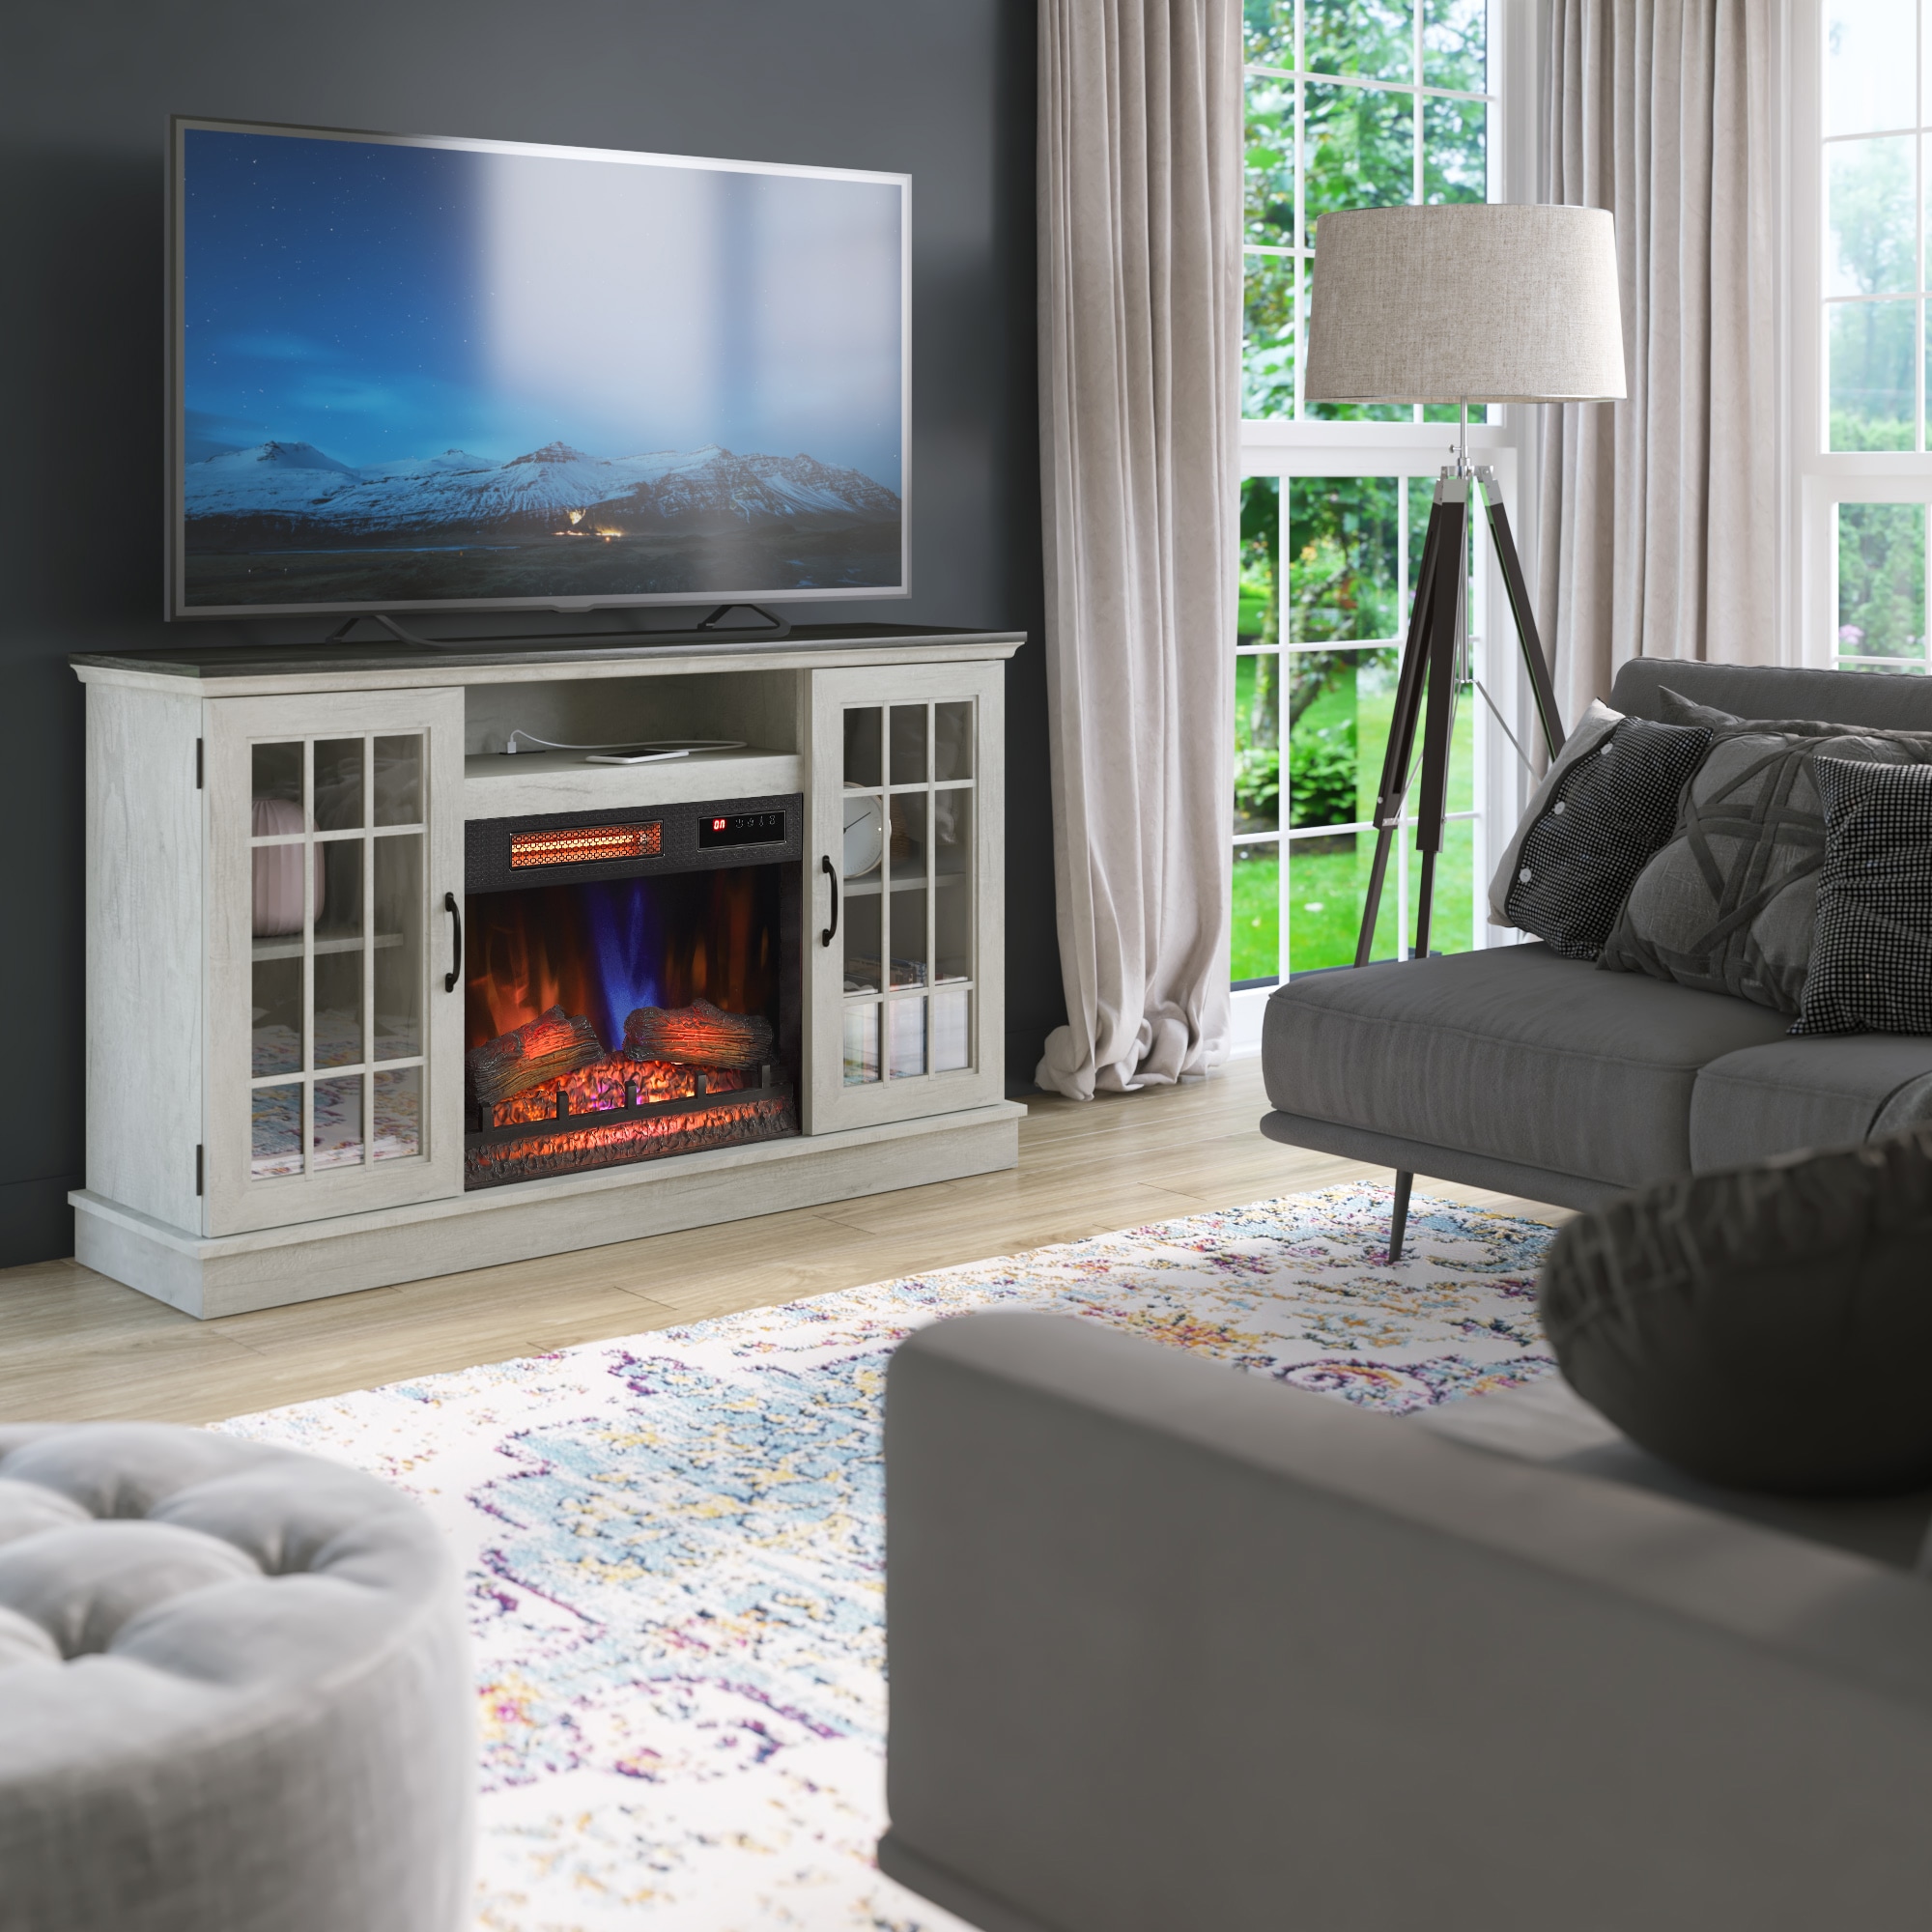 54-in W Geneva and Fairfax Oak TV Stand with Infrared Quartz Electric Fireplace in Off-White | - allen + roth 144709